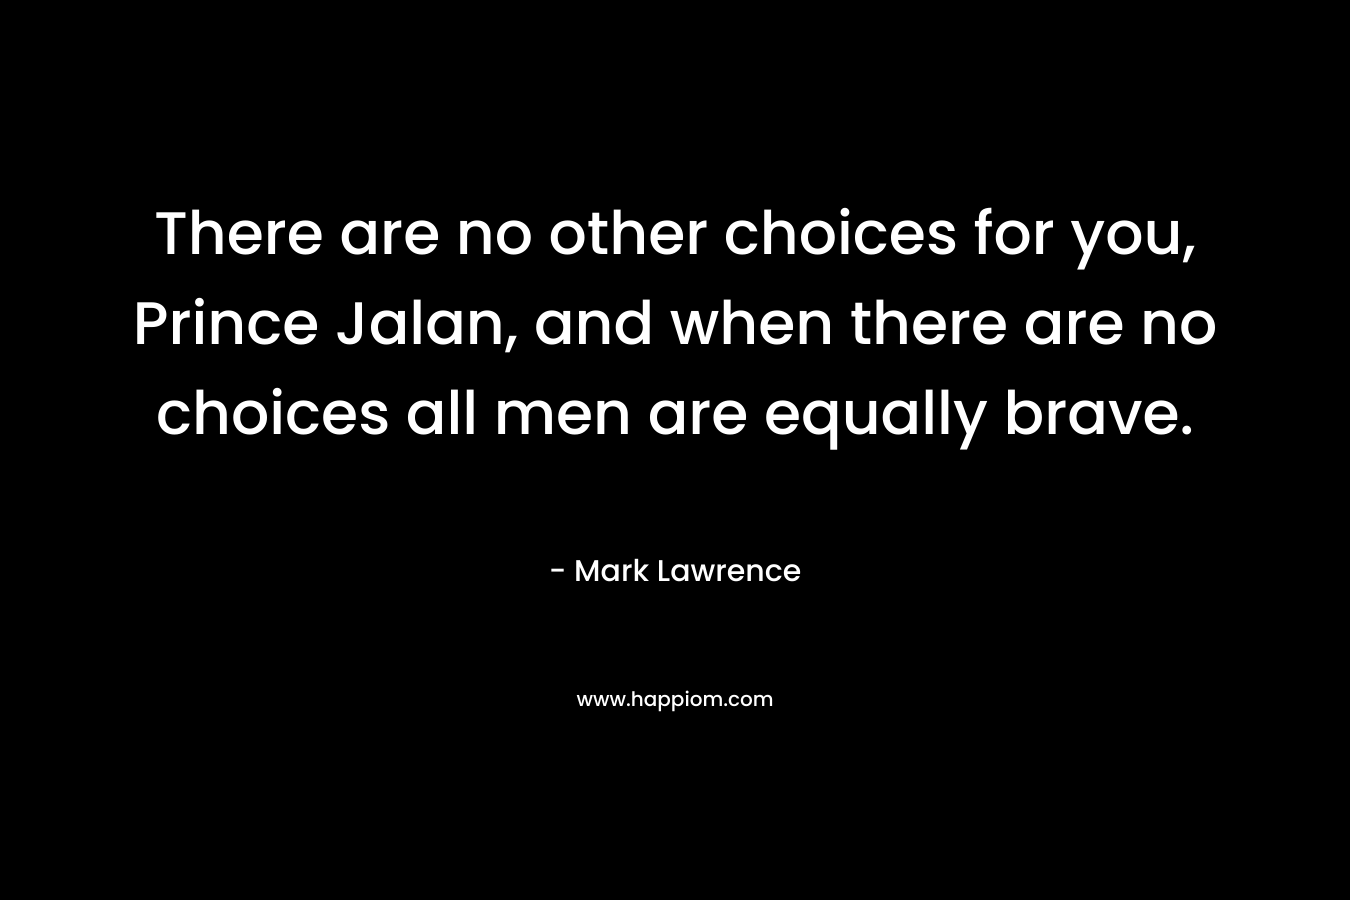 There are no other choices for you, Prince Jalan, and when there are no choices all men are equally brave.